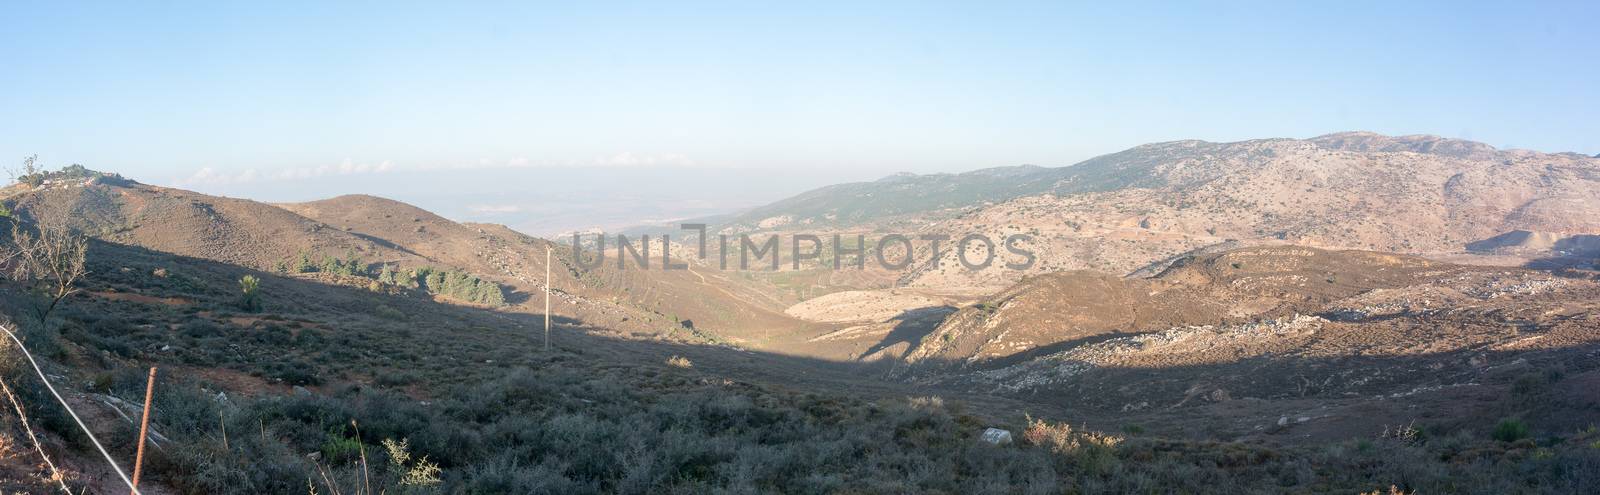 Hermon mountain panorama in Israel by javax